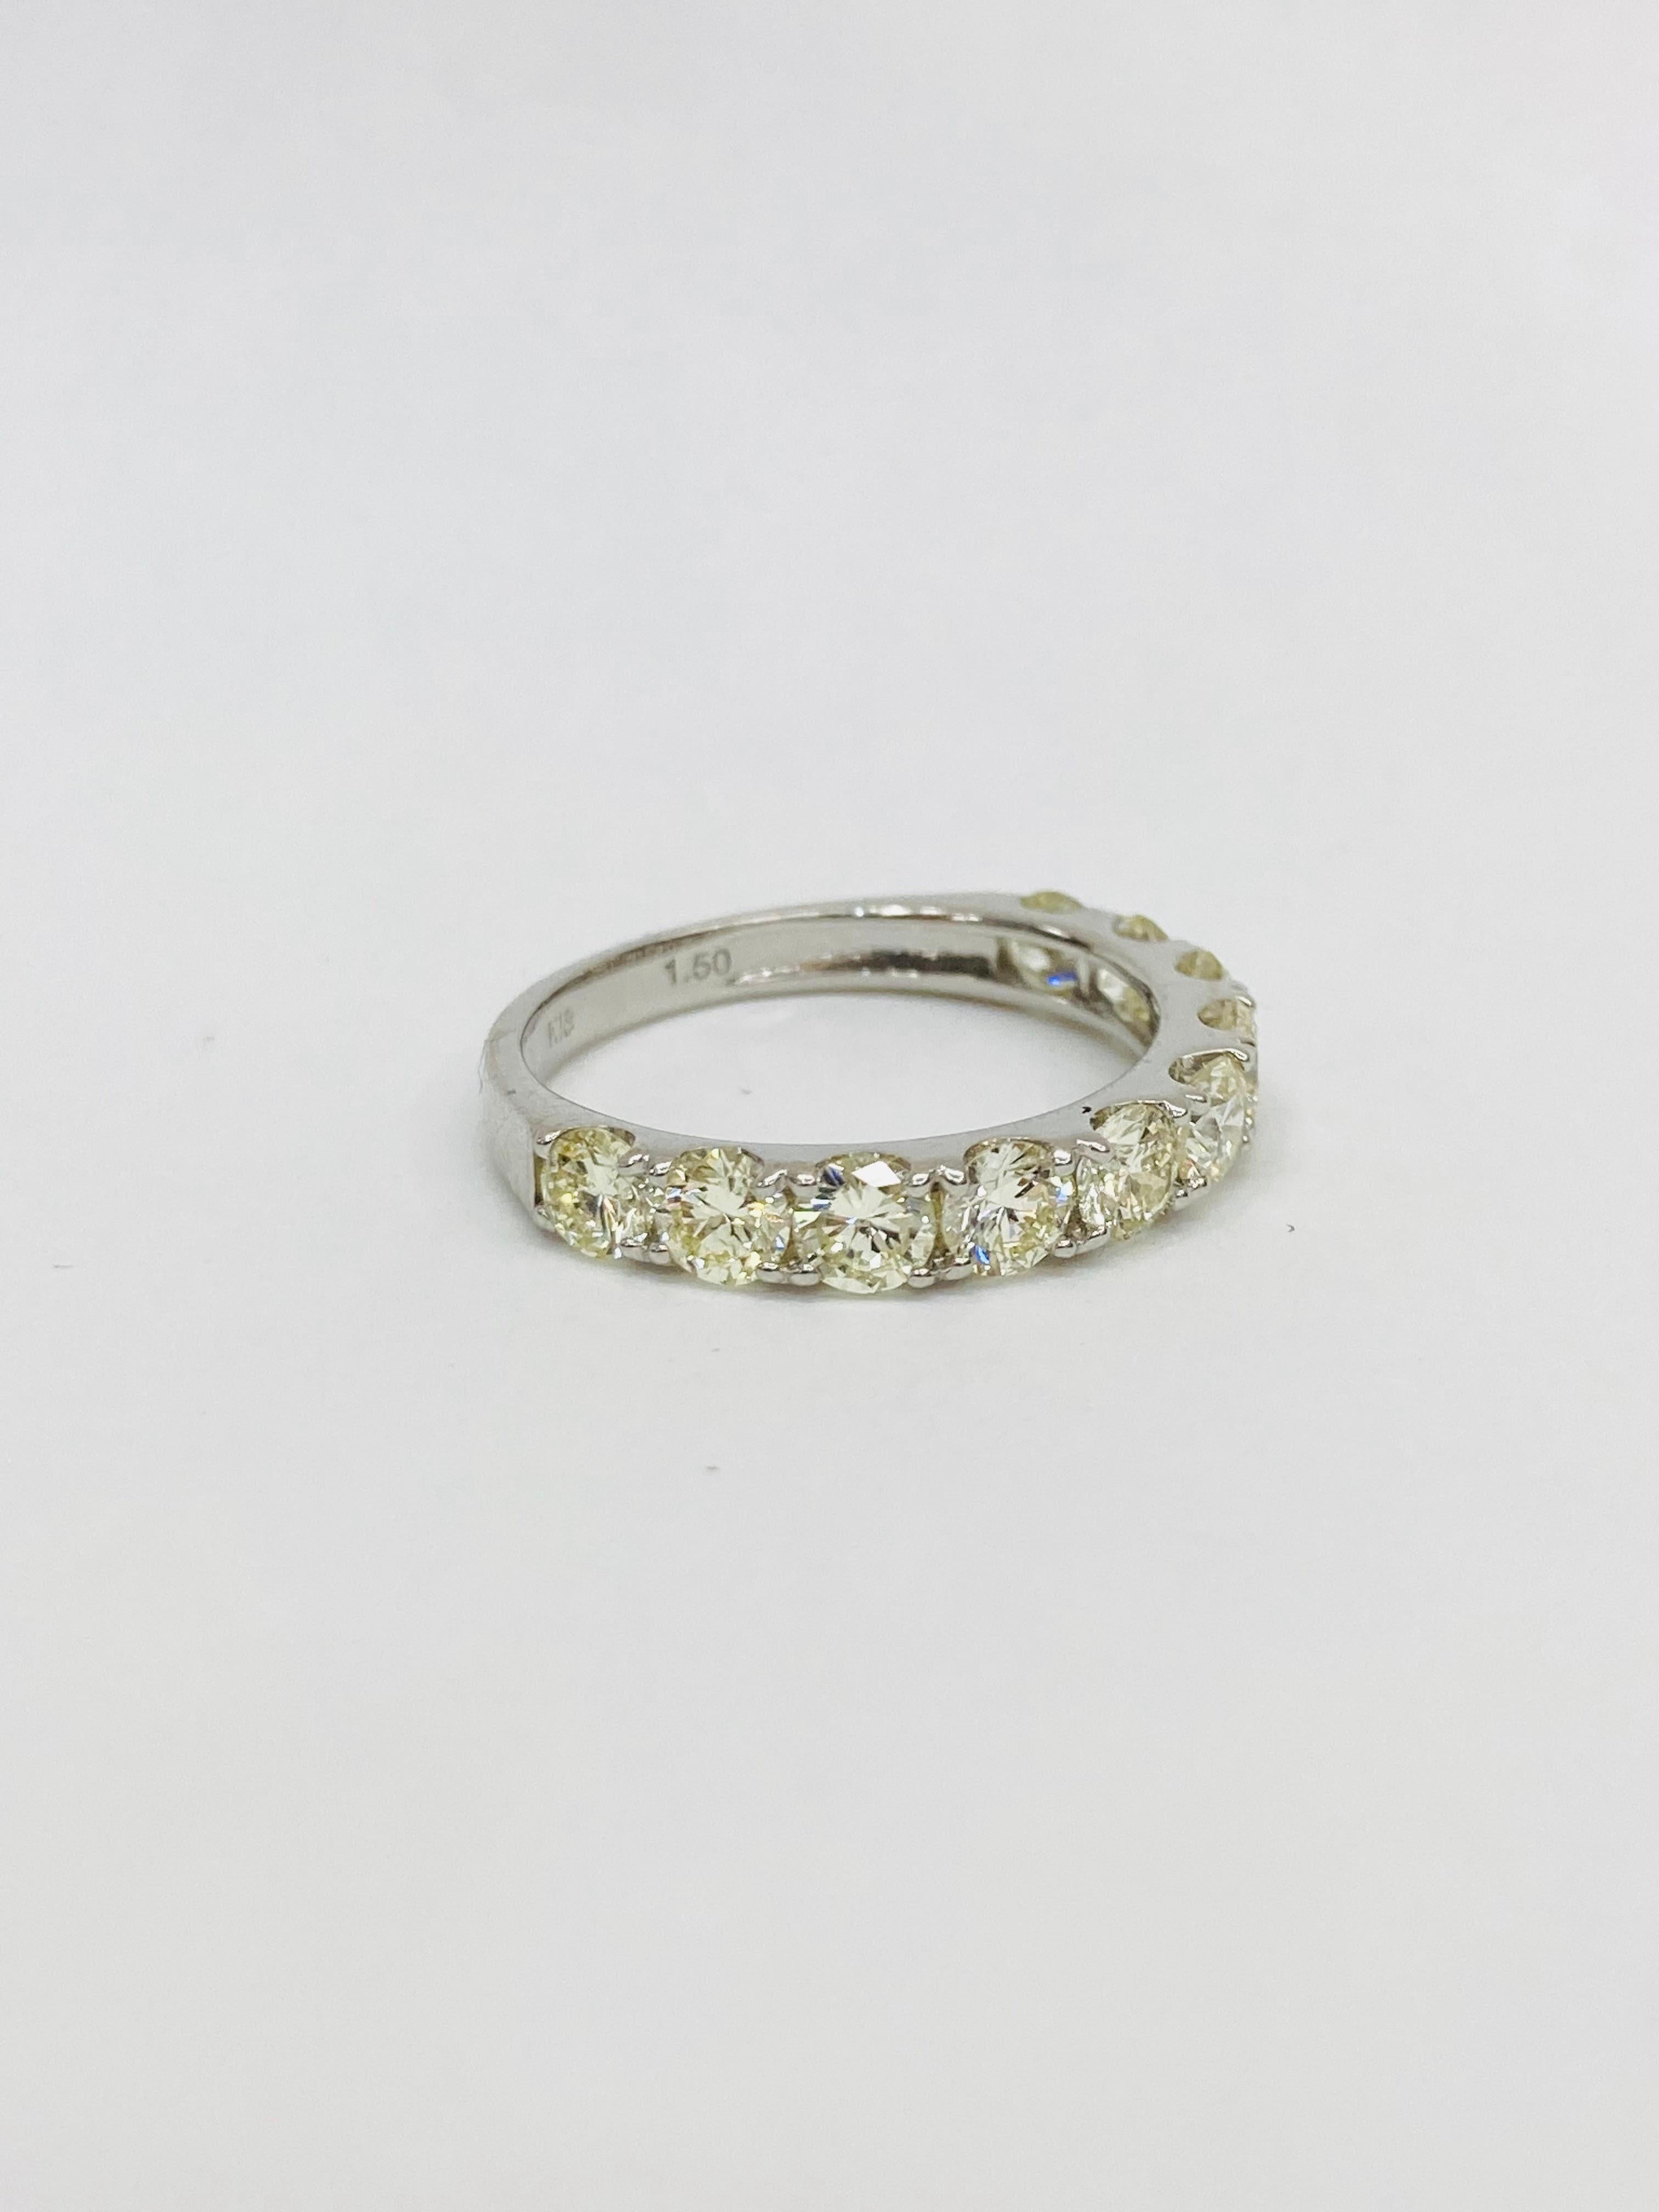 Bochic “Vintage Retro” Eternity 18K Gold & Round Shape Diamonds Ring 
Diamonds - 1.50 Carat 


This Ring is from the 